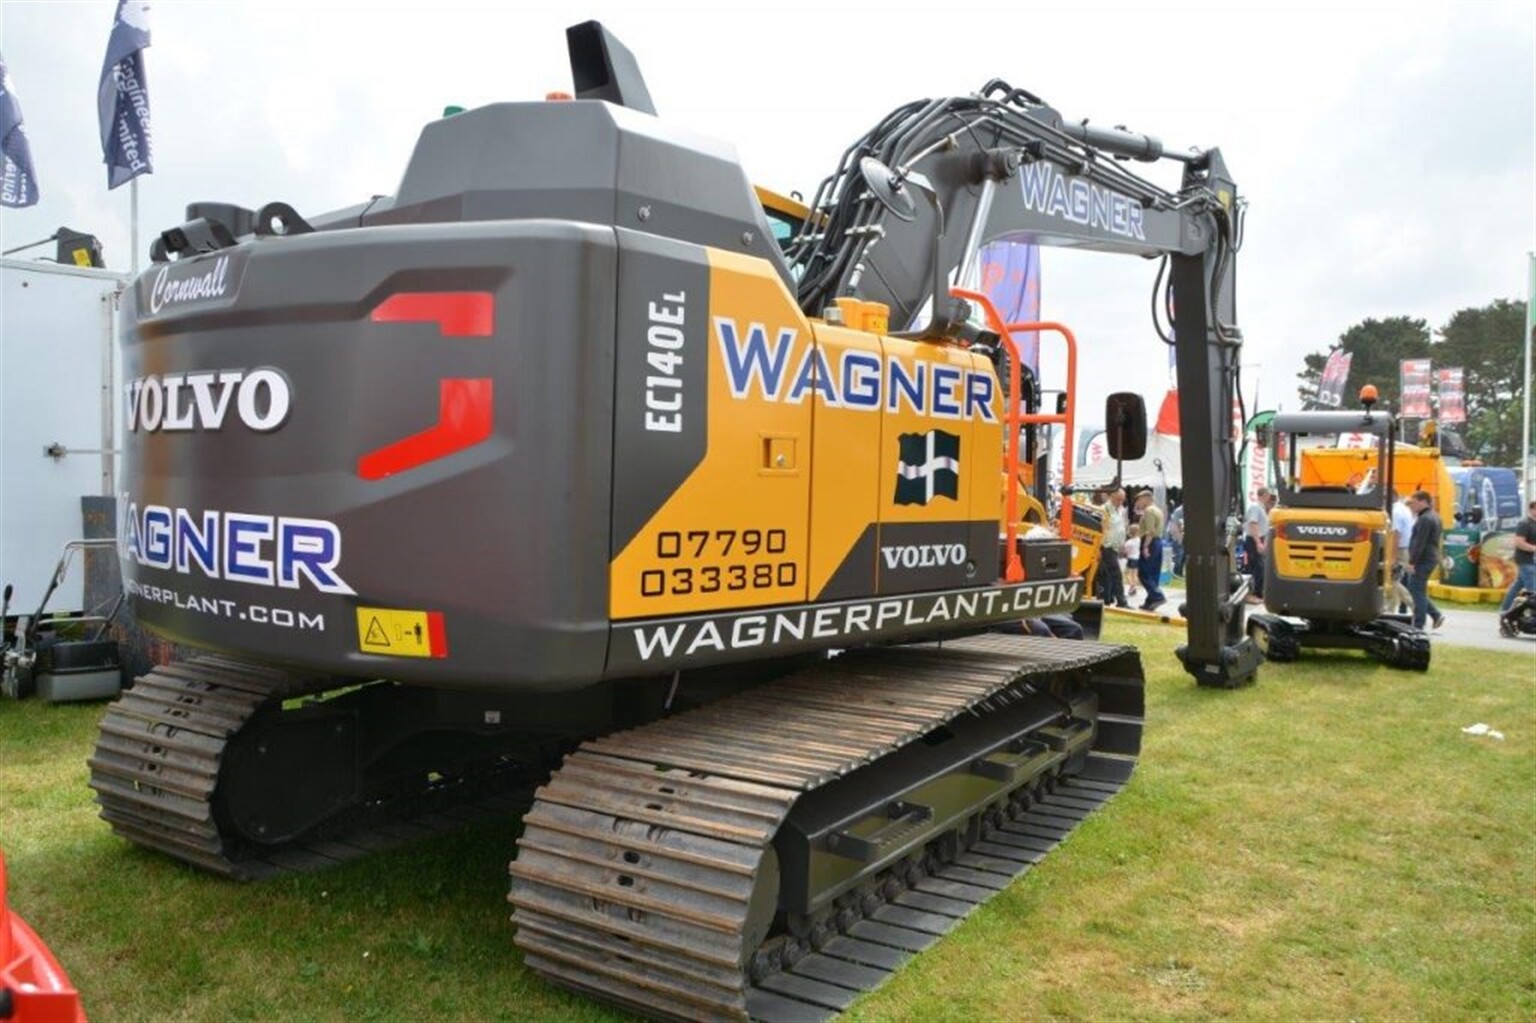 Diggers day out at the Royal Cornwall Show (Part Two)